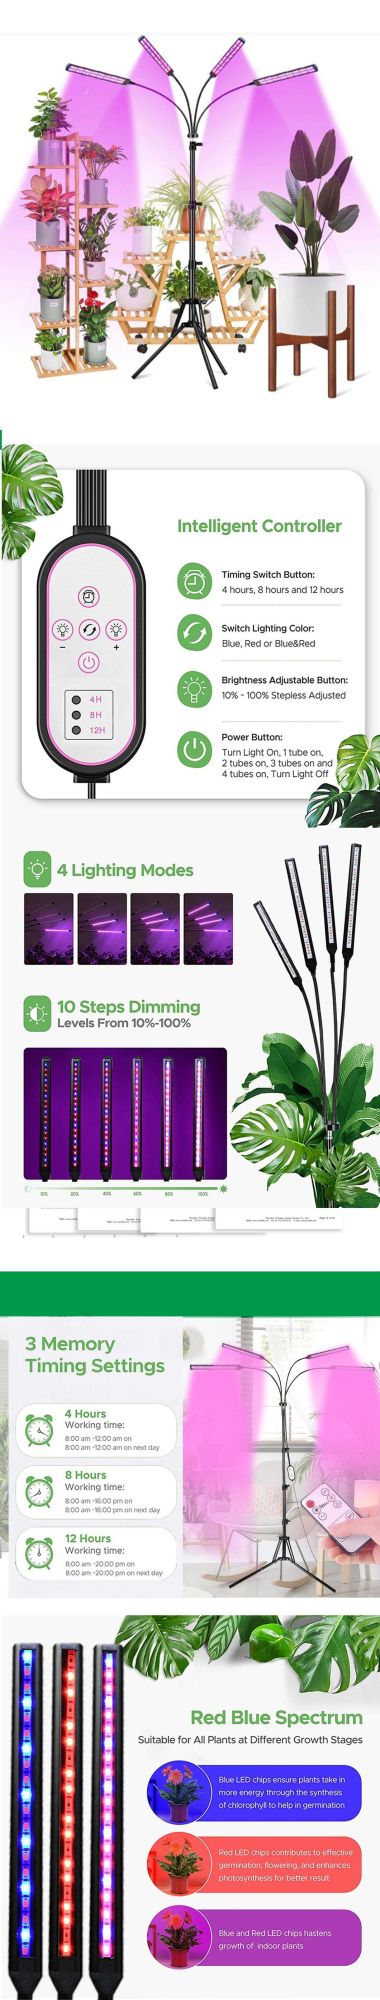 Home Depot Indoor Full Spectrum Hydroponic LED Grow Light